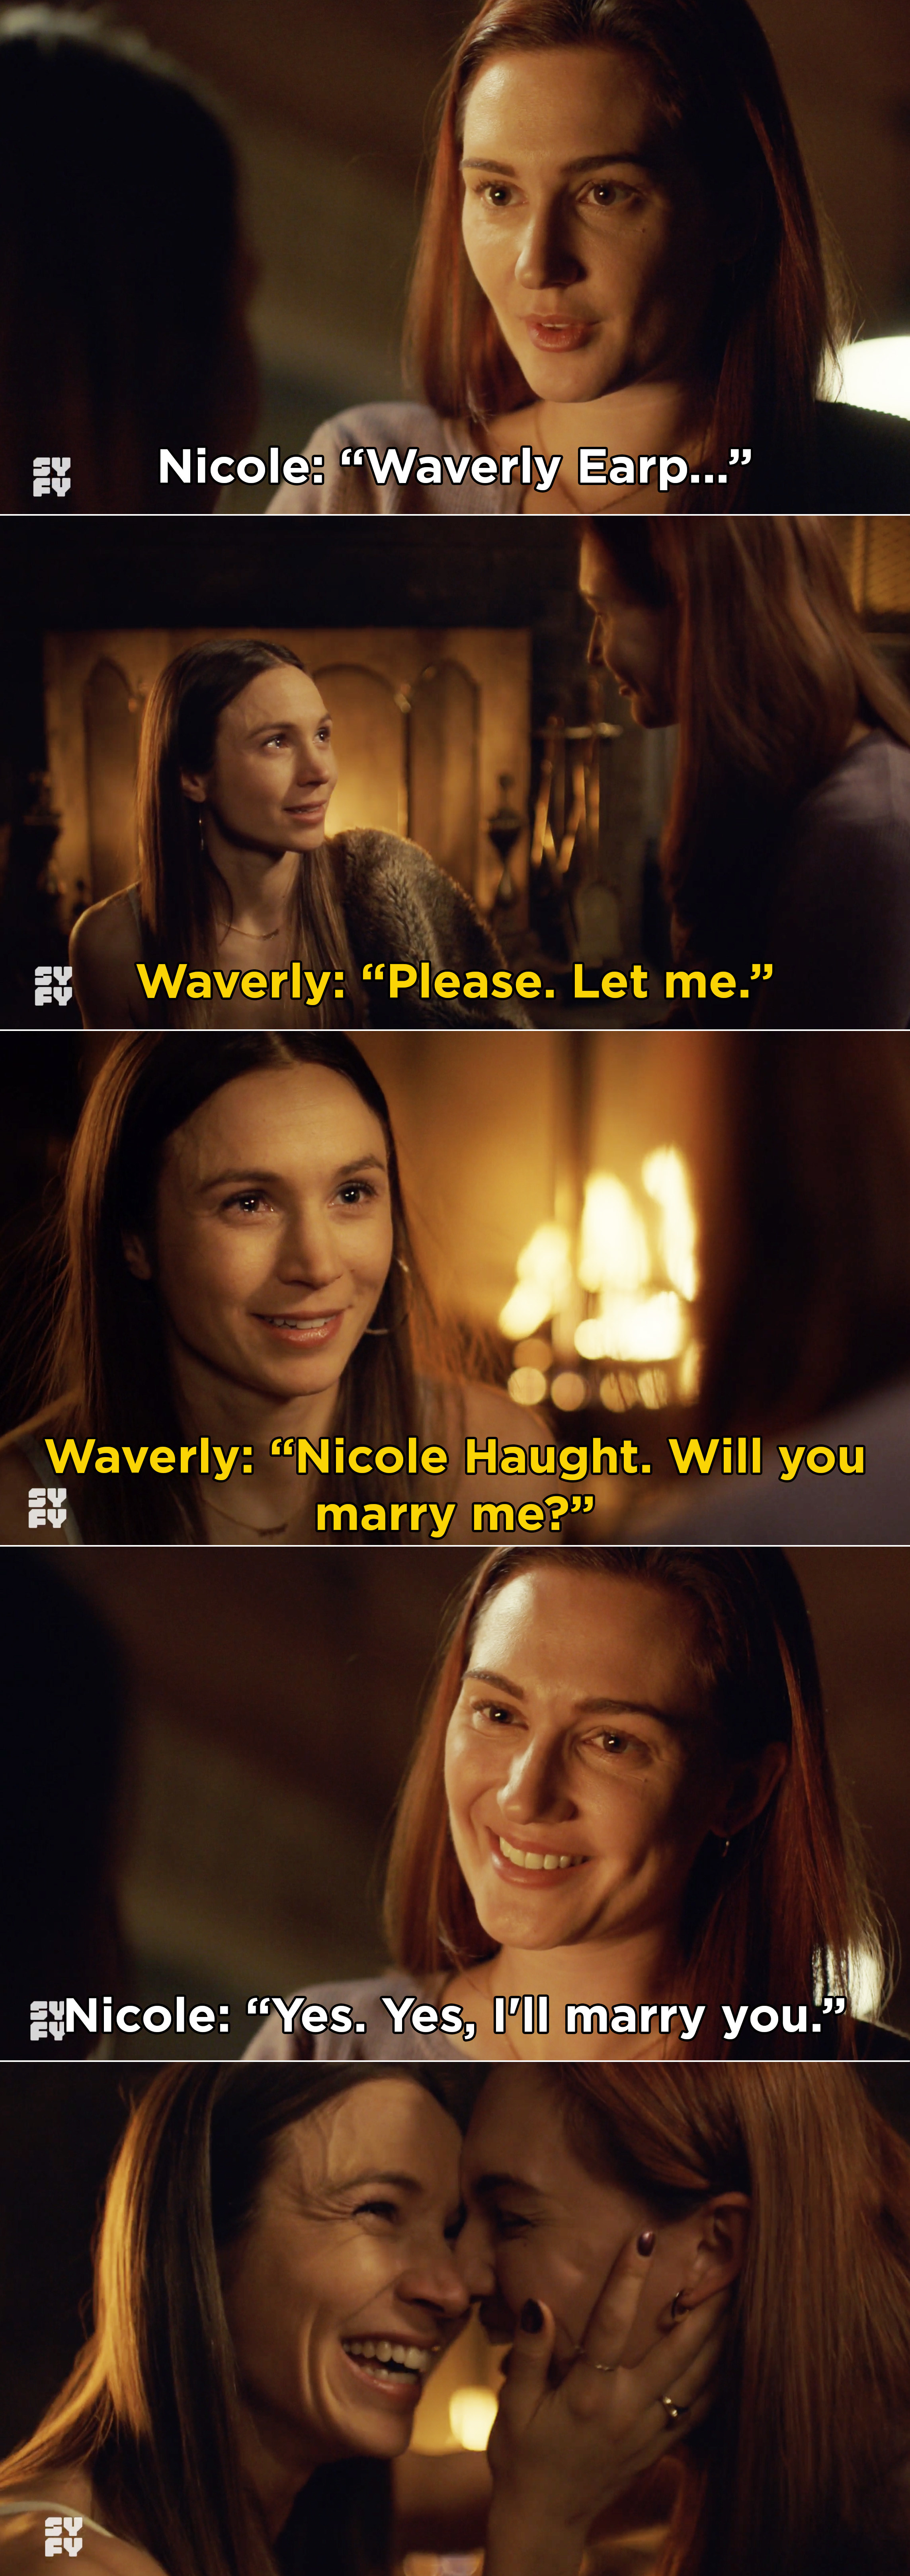 Waverly asking Nicole to marry her and Nicole saying yes